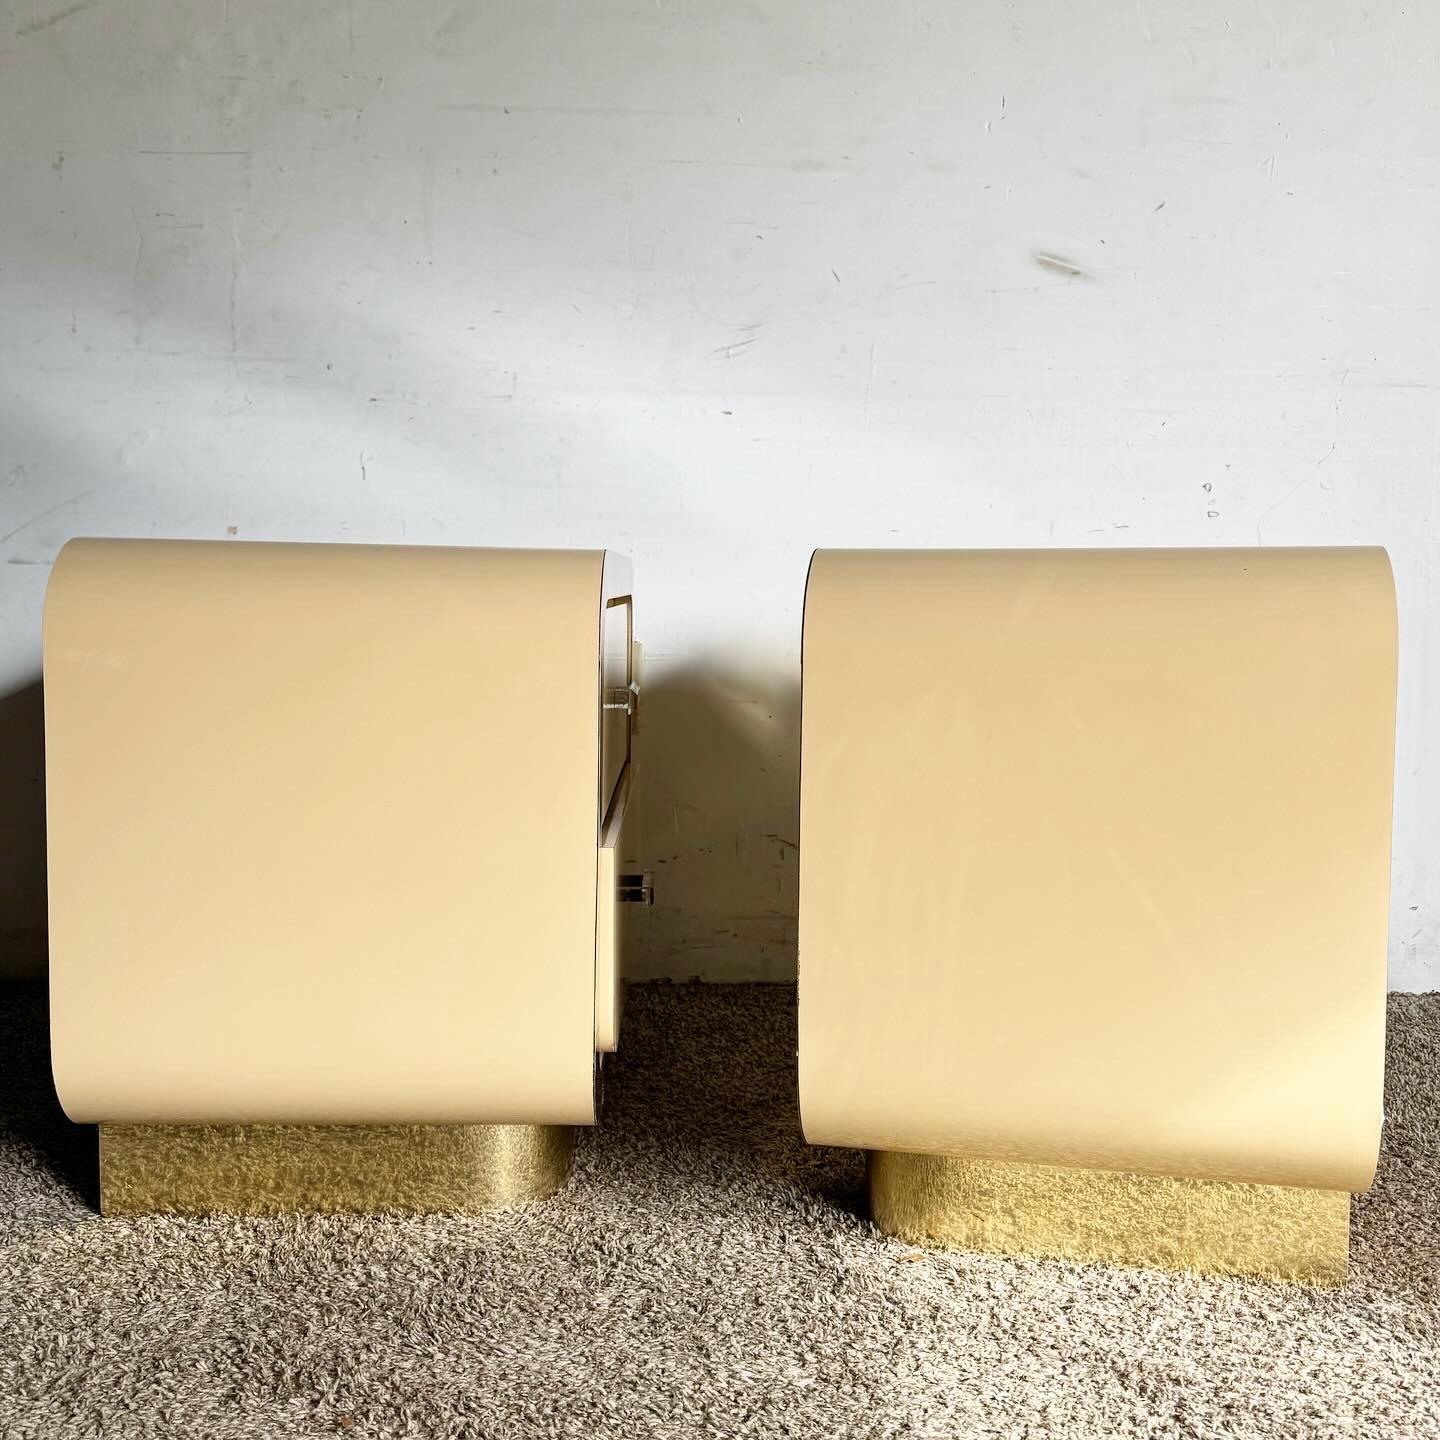 20th Century Postmodern Flesh Lacquer Laminate Waterfall Nightstands With Gold Accents - Pair For Sale